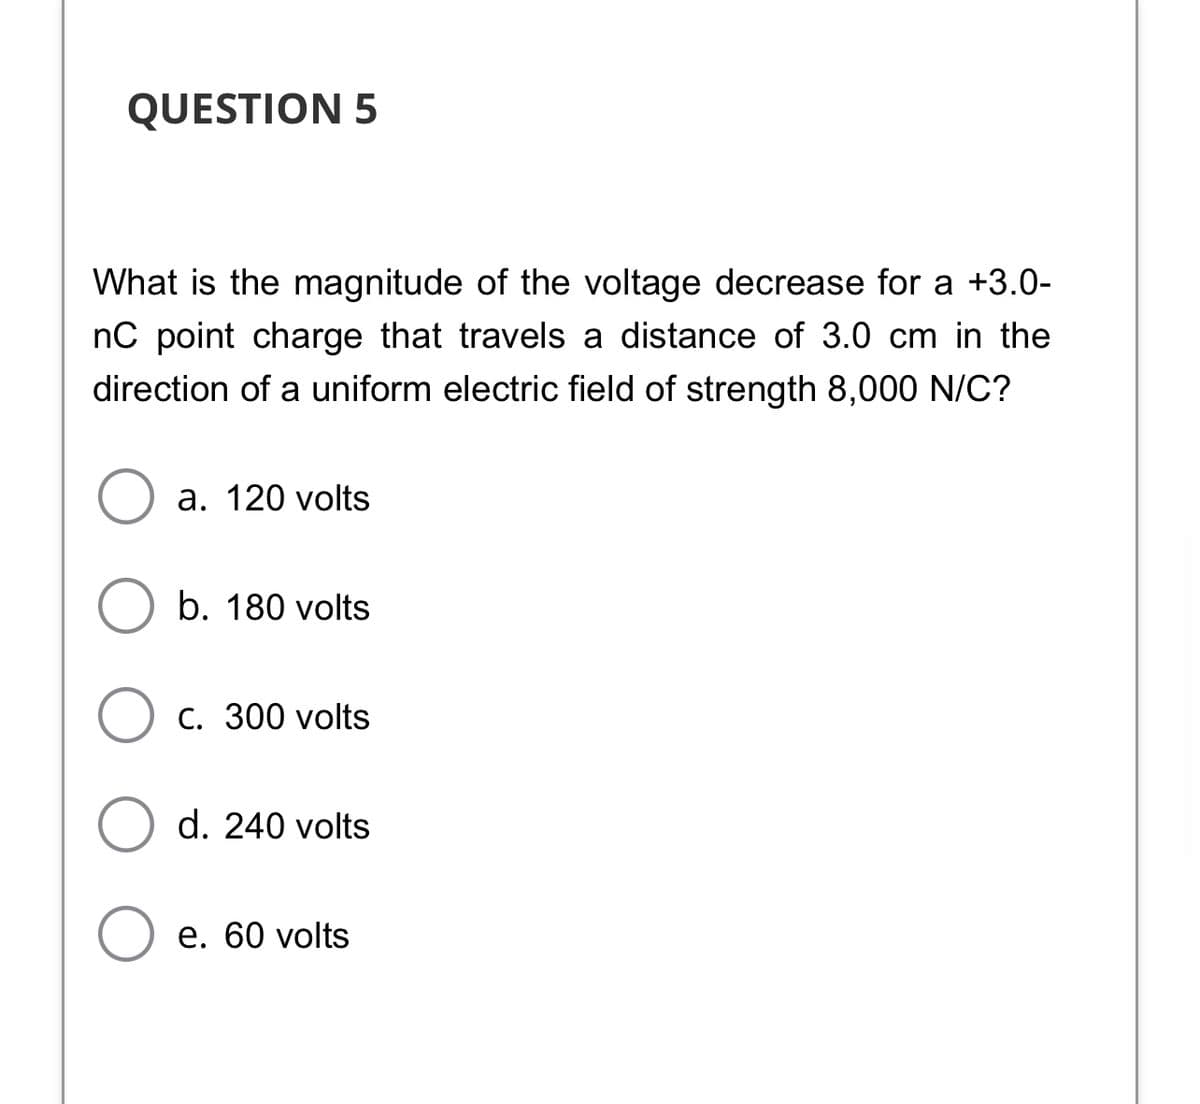 QUESTION 5
What is the magnitude of the voltage decrease for a +3.0-
nC point charge that travels a distance of 3.0 cm in the
direction of a uniform electric field of strength 8,000 N/C?
a. 120 volts
b. 180 volts
С. 300 volts
d. 240 volts
е. 60 volts
